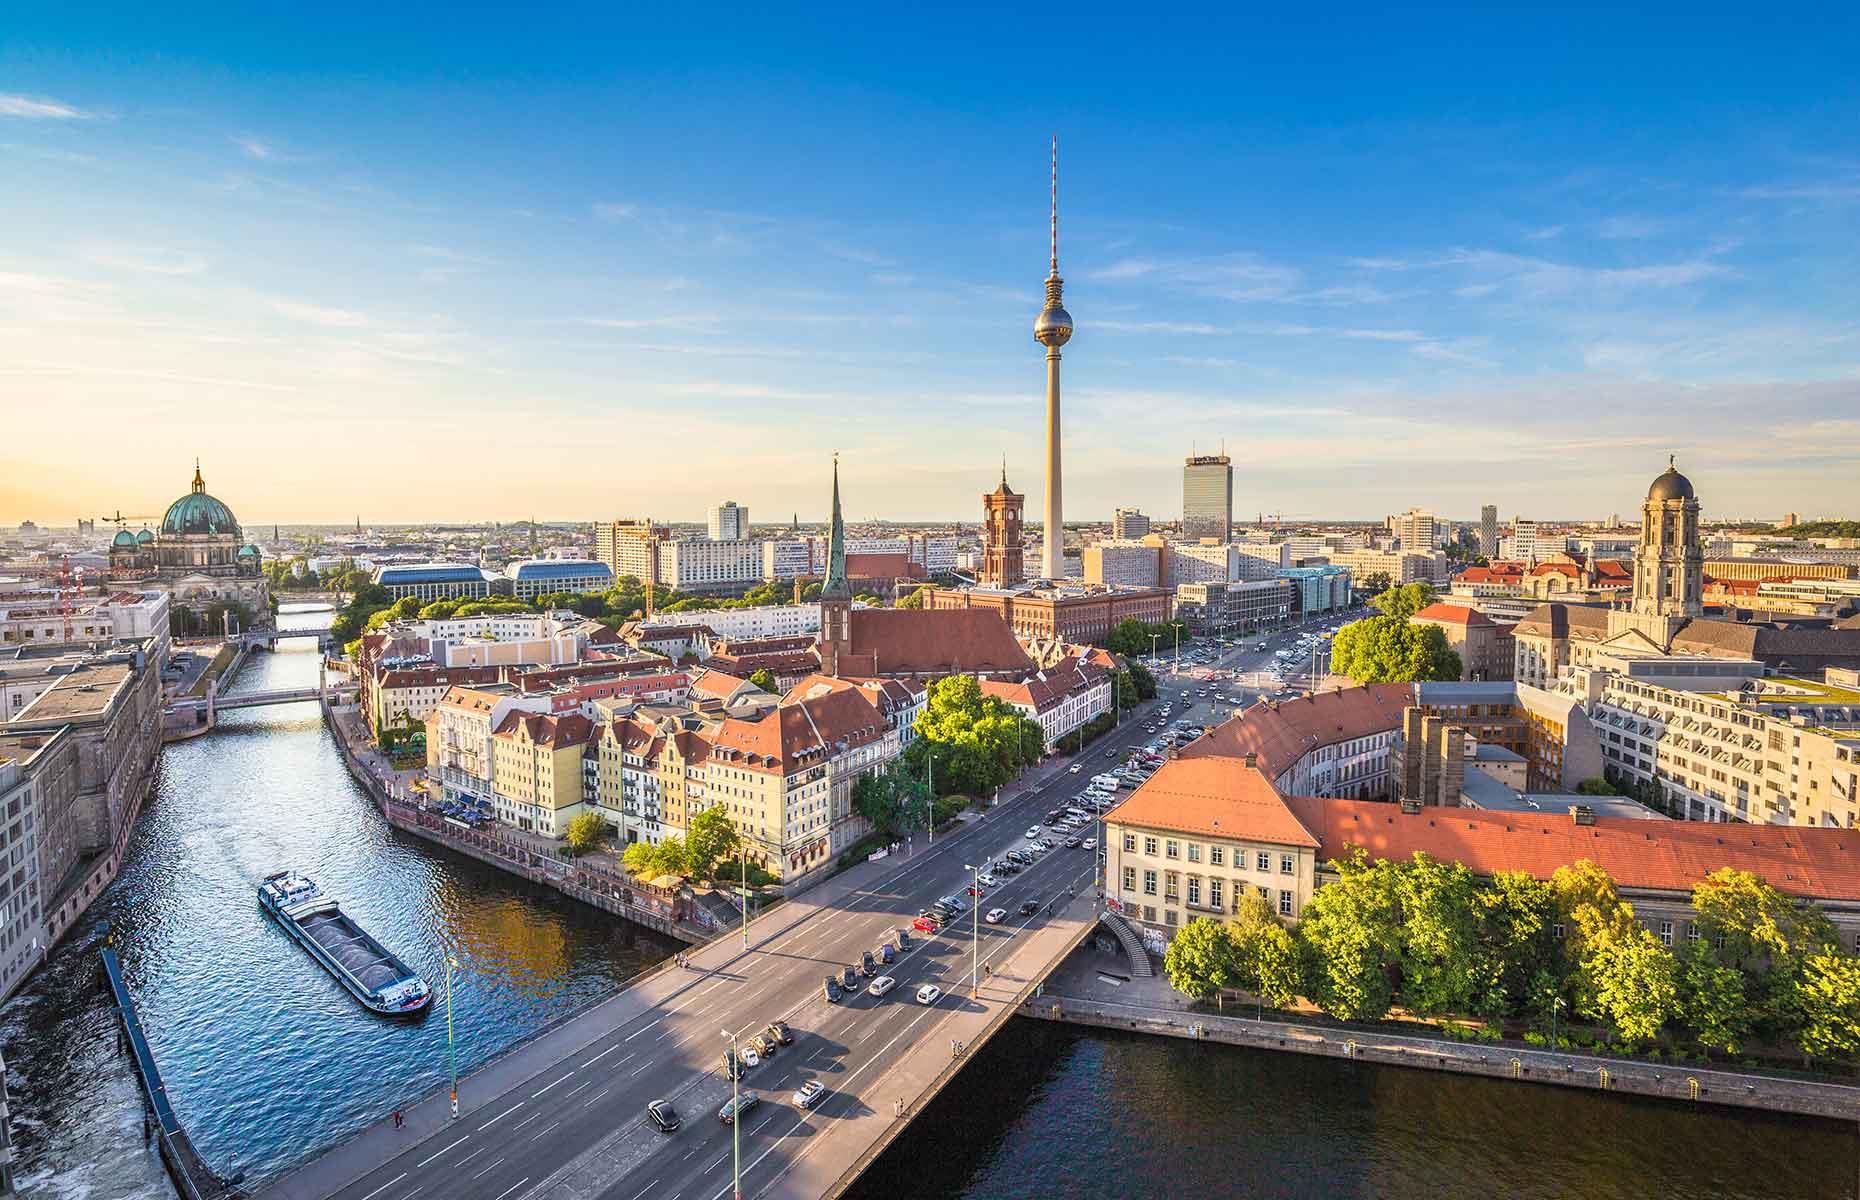 <p>This walk takes one hour and 20 minutes and covers nearly four miles (6.3km) in 8,268 steps. Start at the impressive Berlin Cathedral or the neighboring antiquarian Pergamonmuseum and leave the River Spree behind you as you inch closer to Brandenburg Gate and into the fringes of Großer Tiergarten. Stop off at the Reichstag, home to the German parliament, before entering the sprawling park which includes a zoo and aquarium in its southern section. Round off this route at the Kaiser Wilhelm Memorial Church for a moment of reflection amid the hustle and bustle of the city.</p>